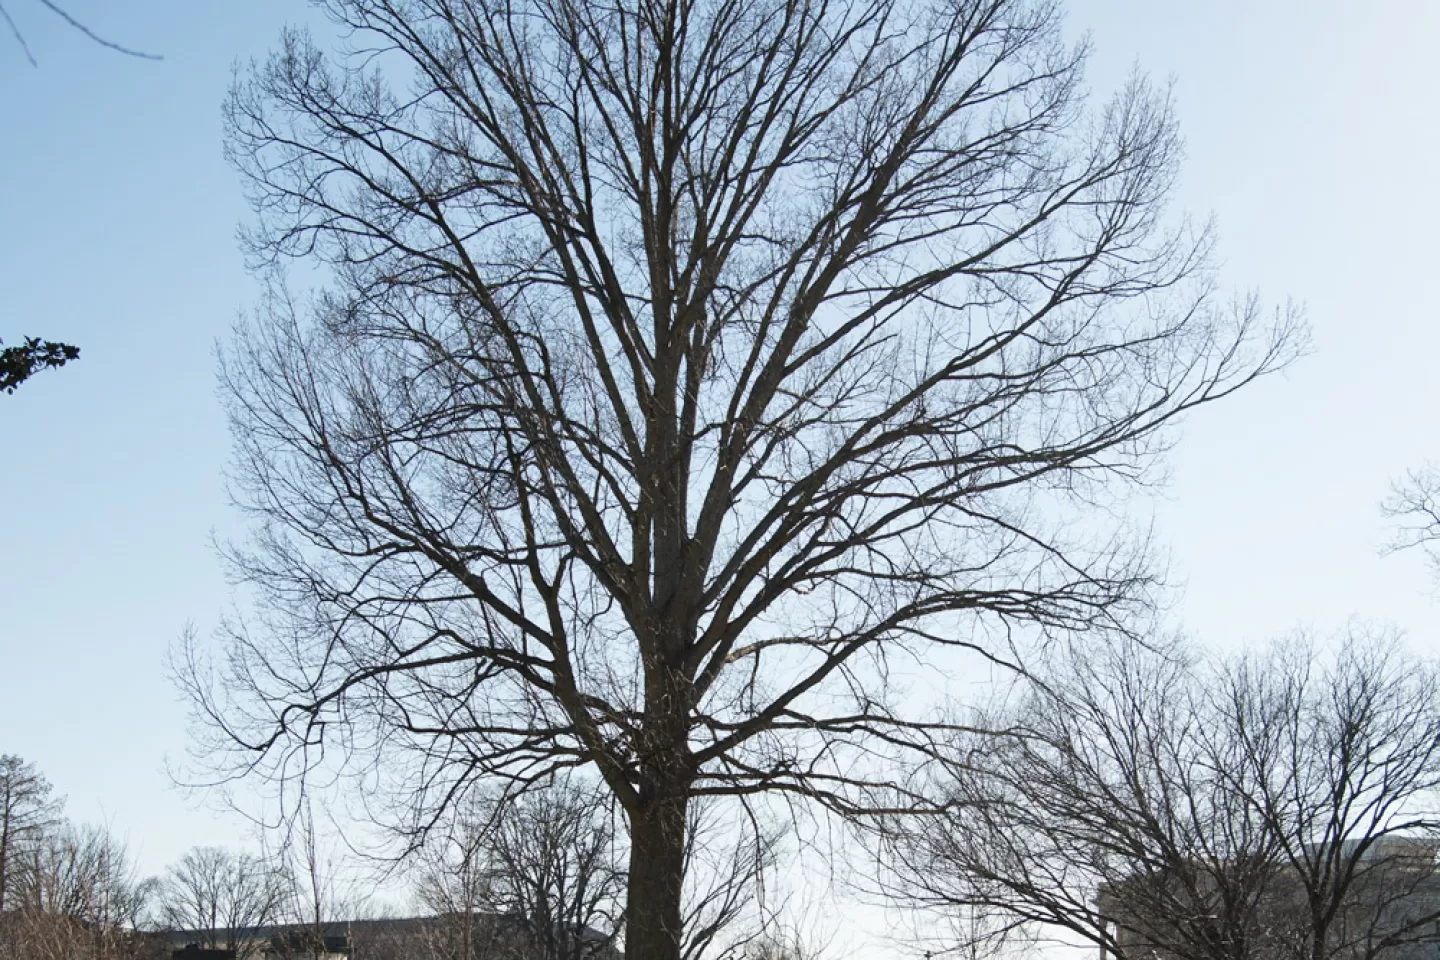 The Senator Thomas P. Gore tree on the U.S. Capitol Grounds during winter.